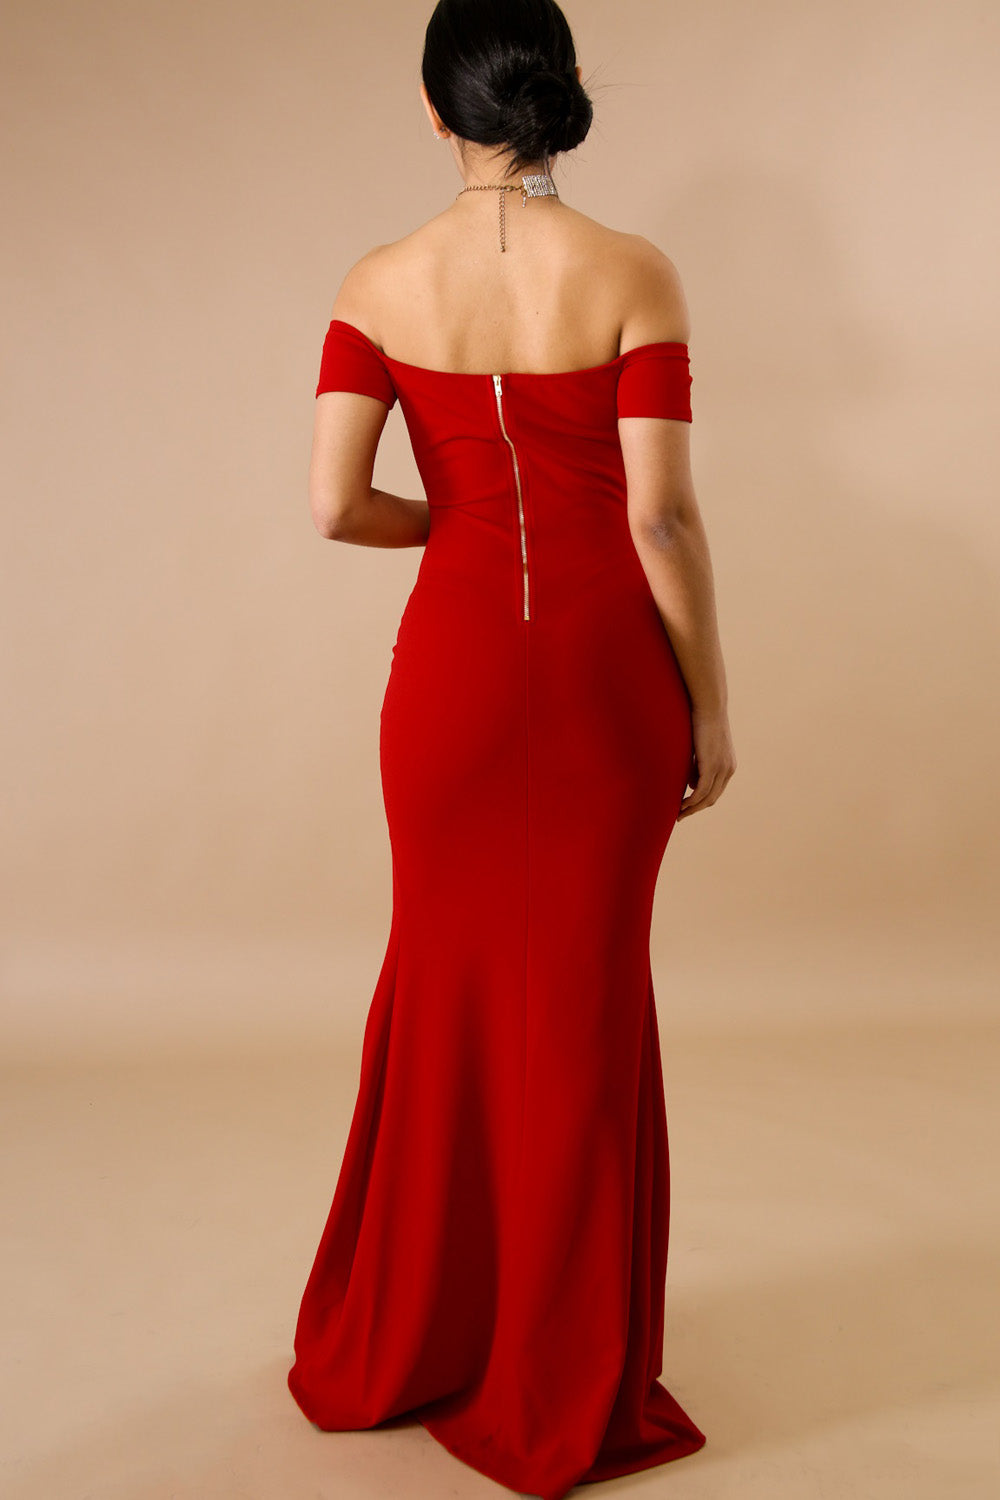 goPals full length red off-the-shoulder dress with thigh high slit. 